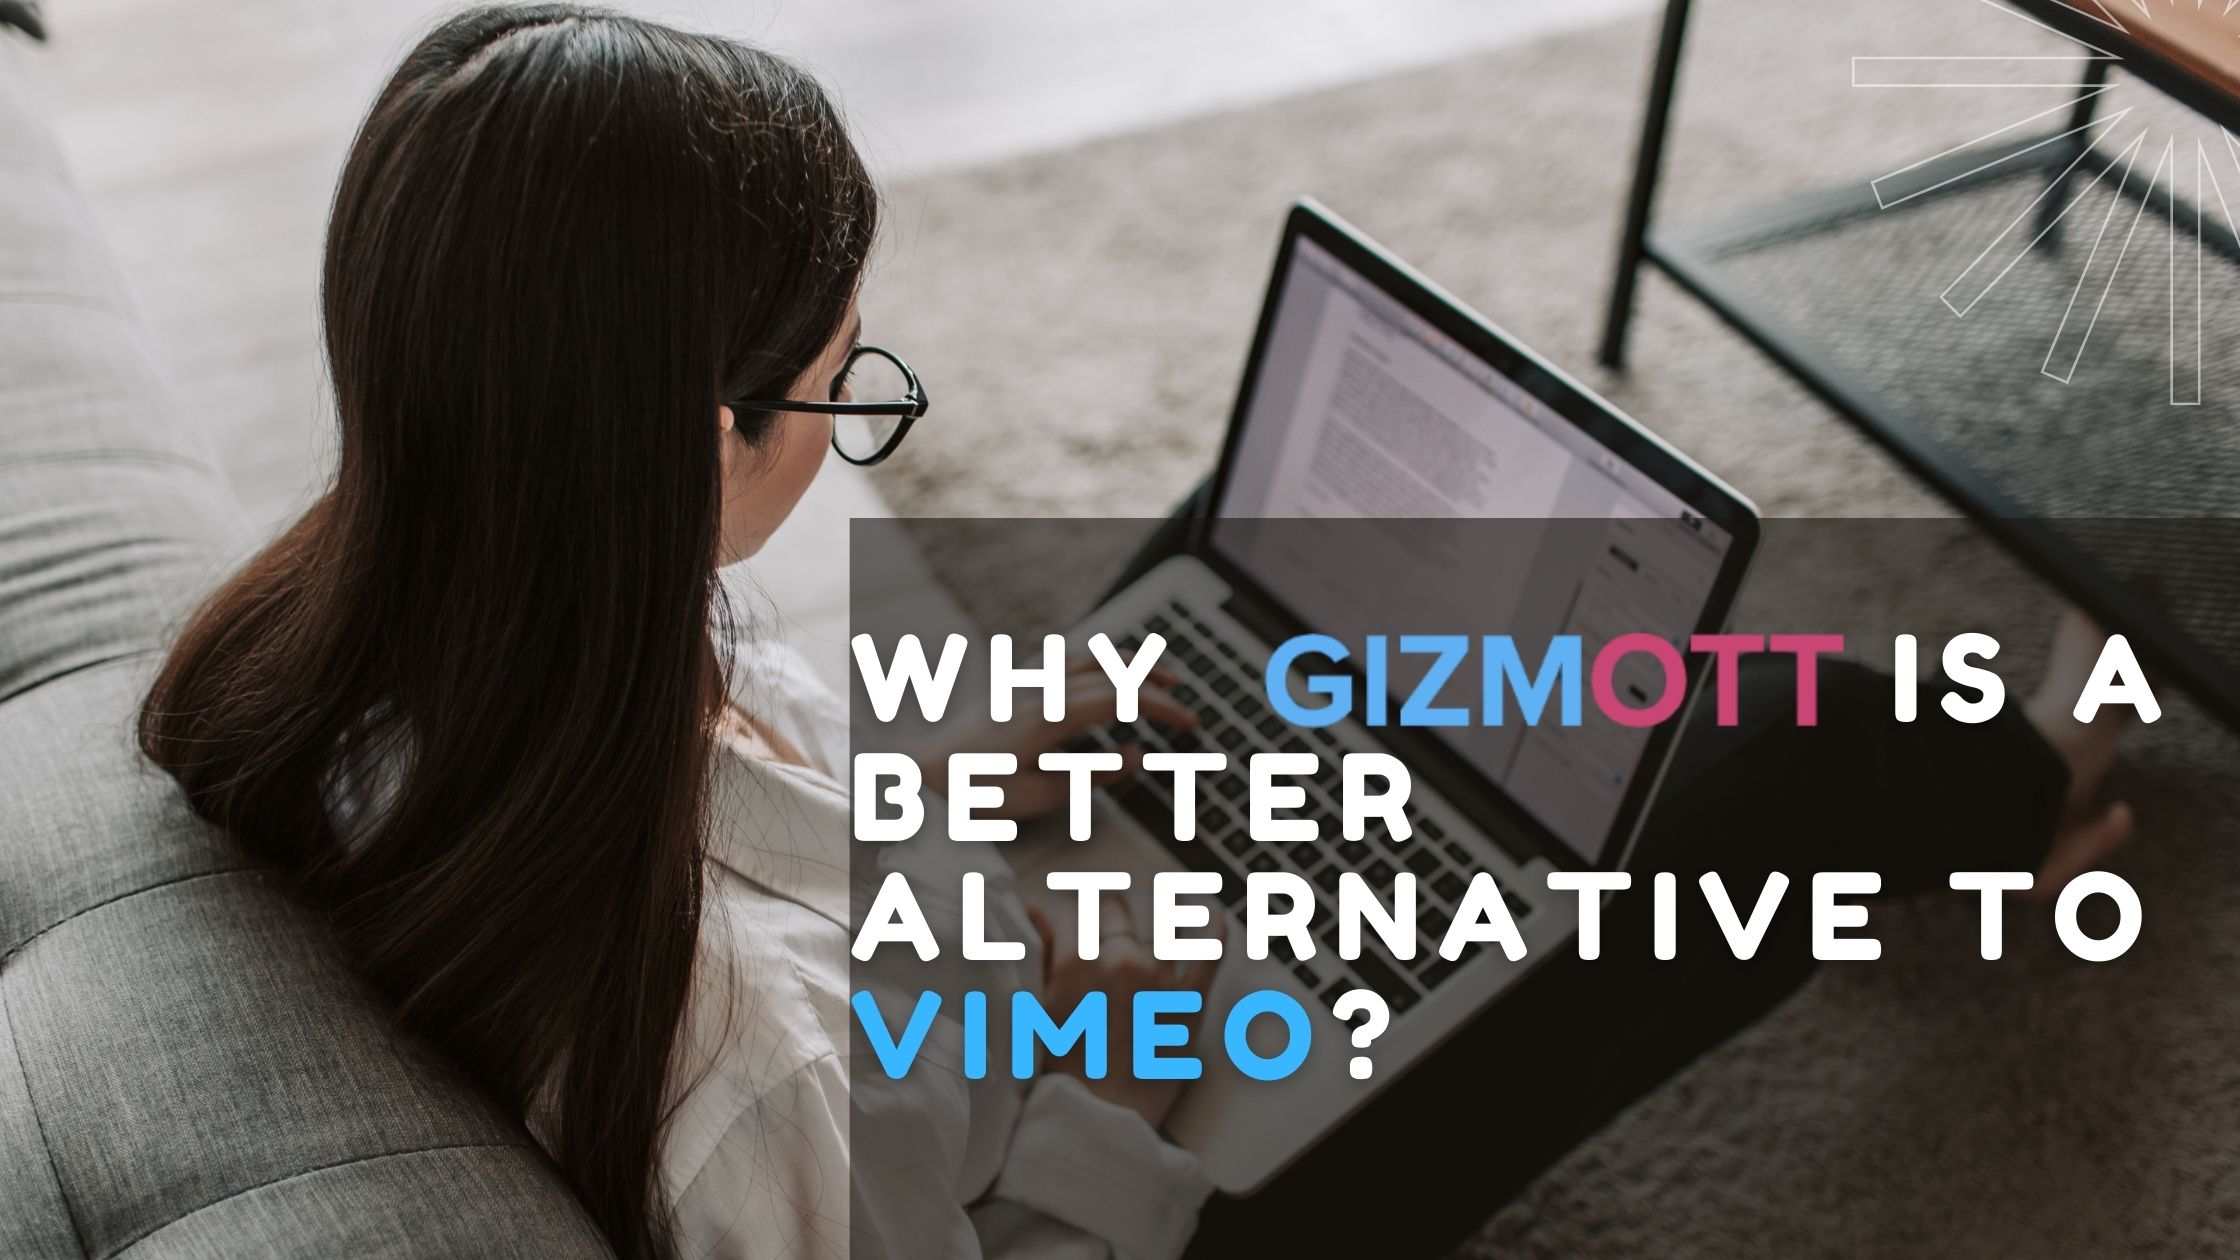 Why Gizmott is a better alternative to Vimeo?